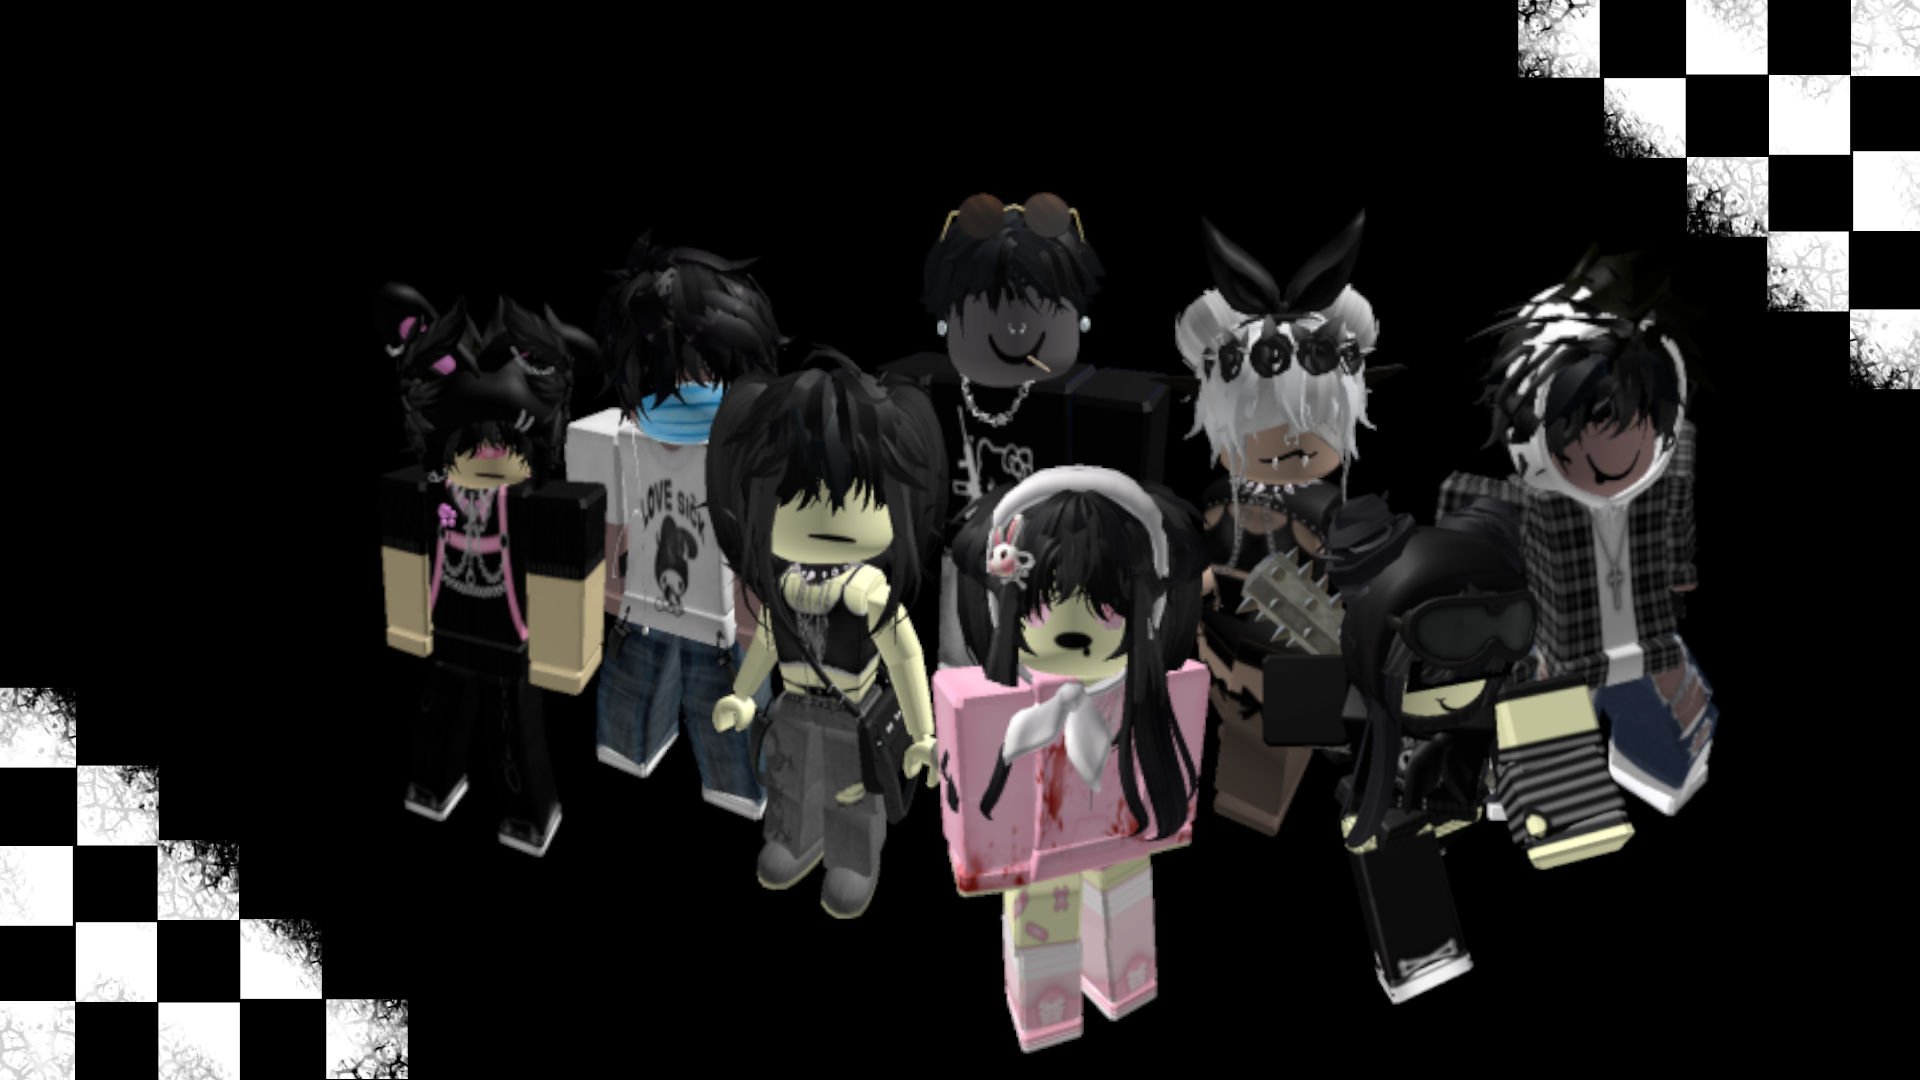 Pin by Terrica on 3>  Cool avatars, Emo roblox avatar, Roblox